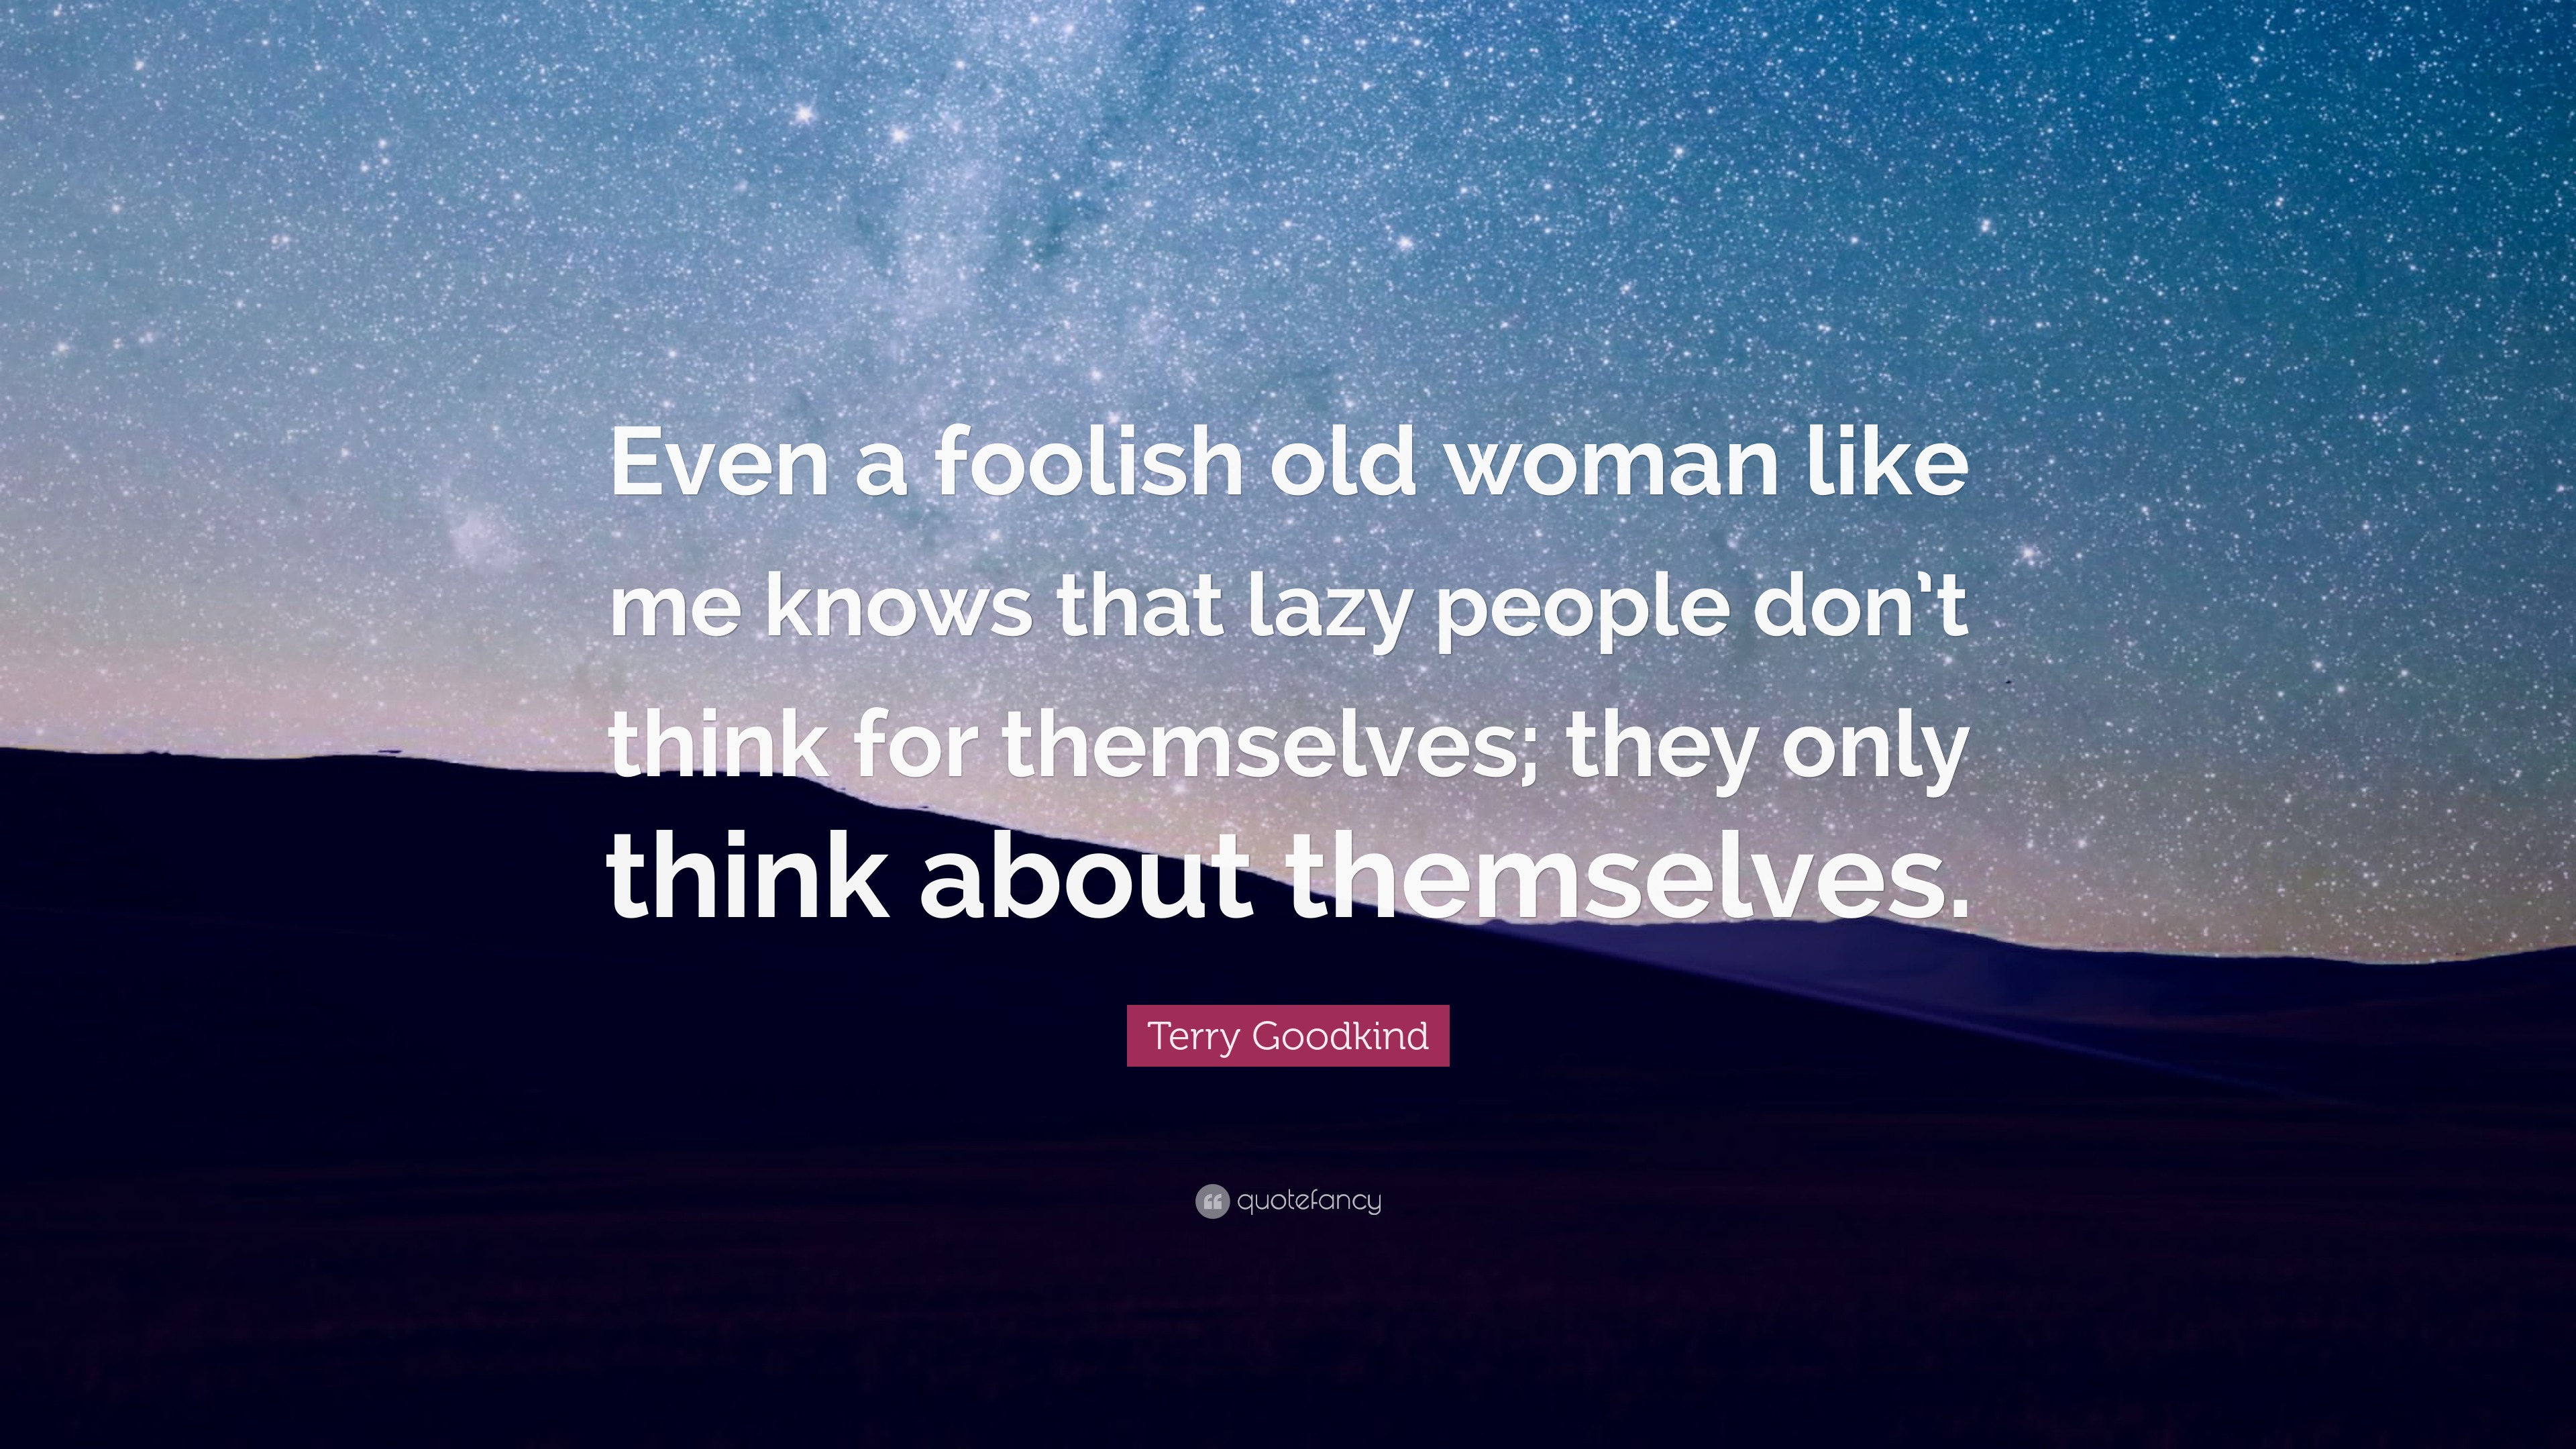 Terry Goodkind Quote: “Even a foolish old woman like me knows that lazy ...